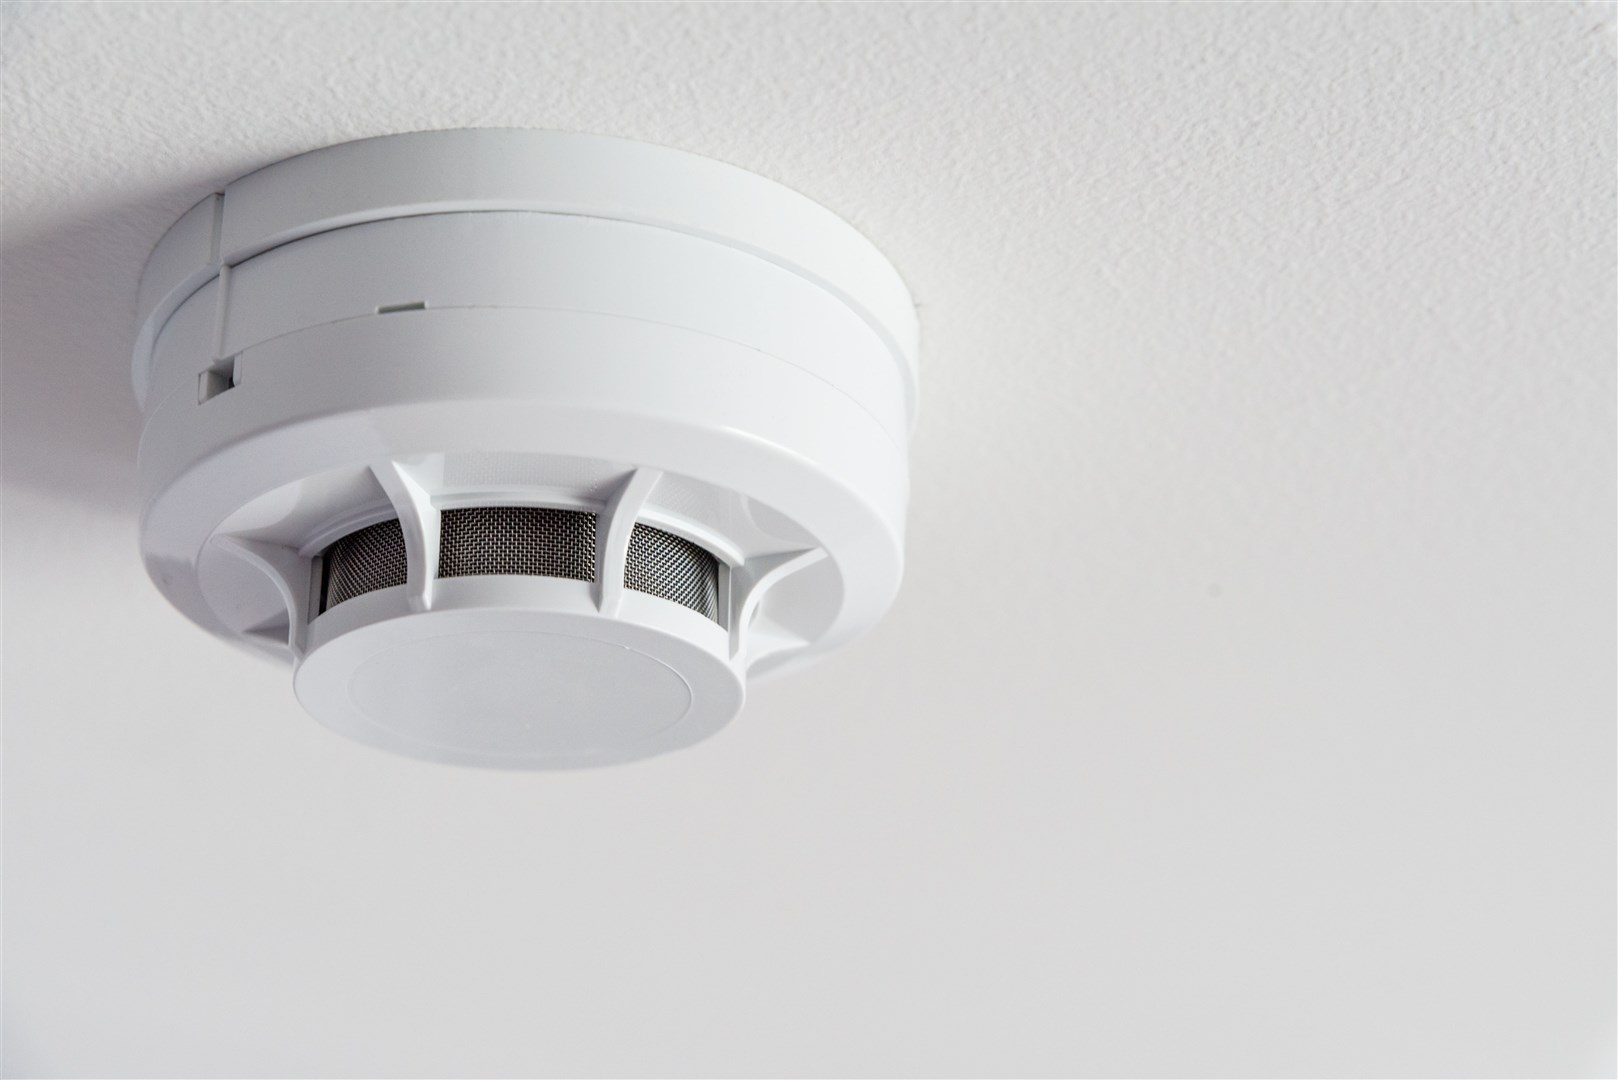 Moray Council will be upgrading smoke, heat and carbon monoxide alarms in council homes to meet new legal safety standards.